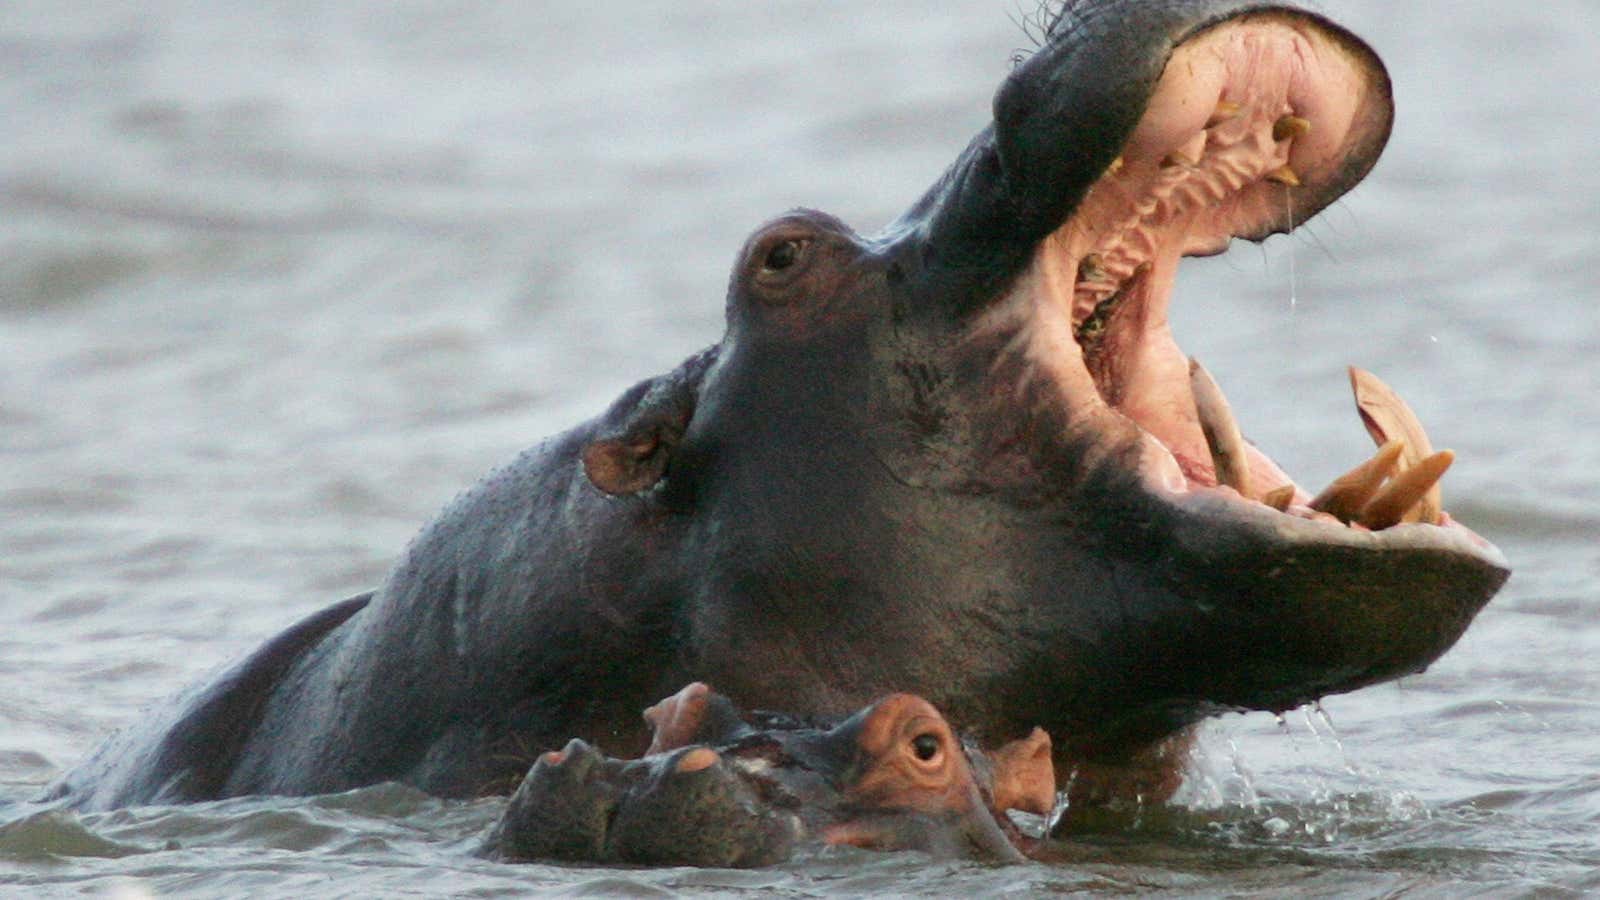 Hippos face extinction due to ivory demand for their teeth